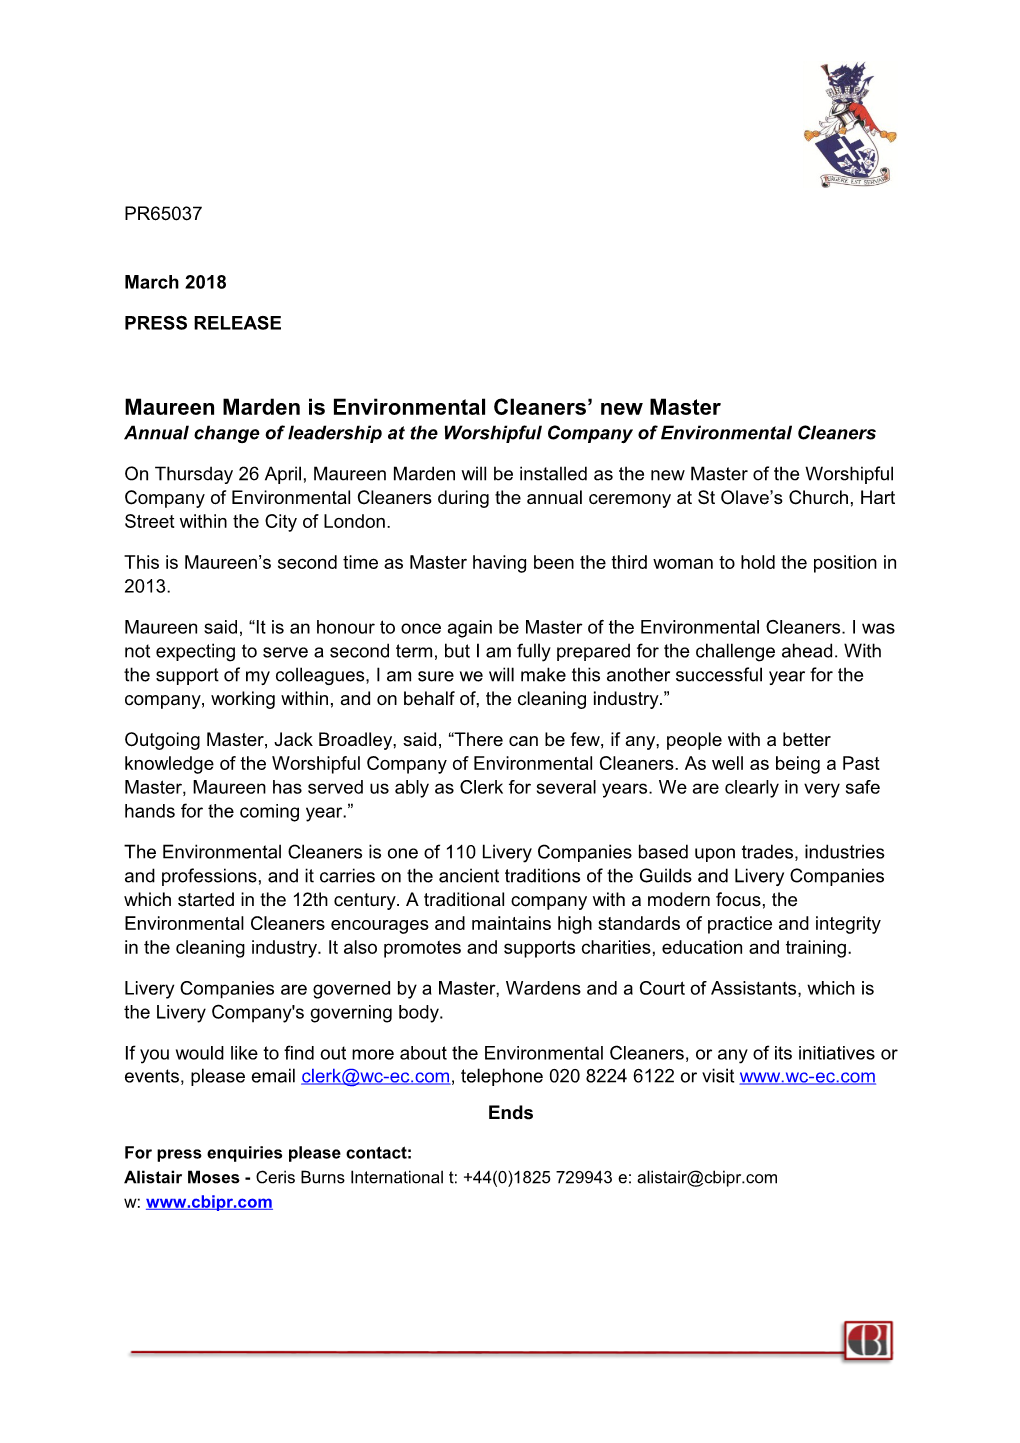 Maureenmarden Is Environmental Cleaners New Master Annual Change of Leadership at The